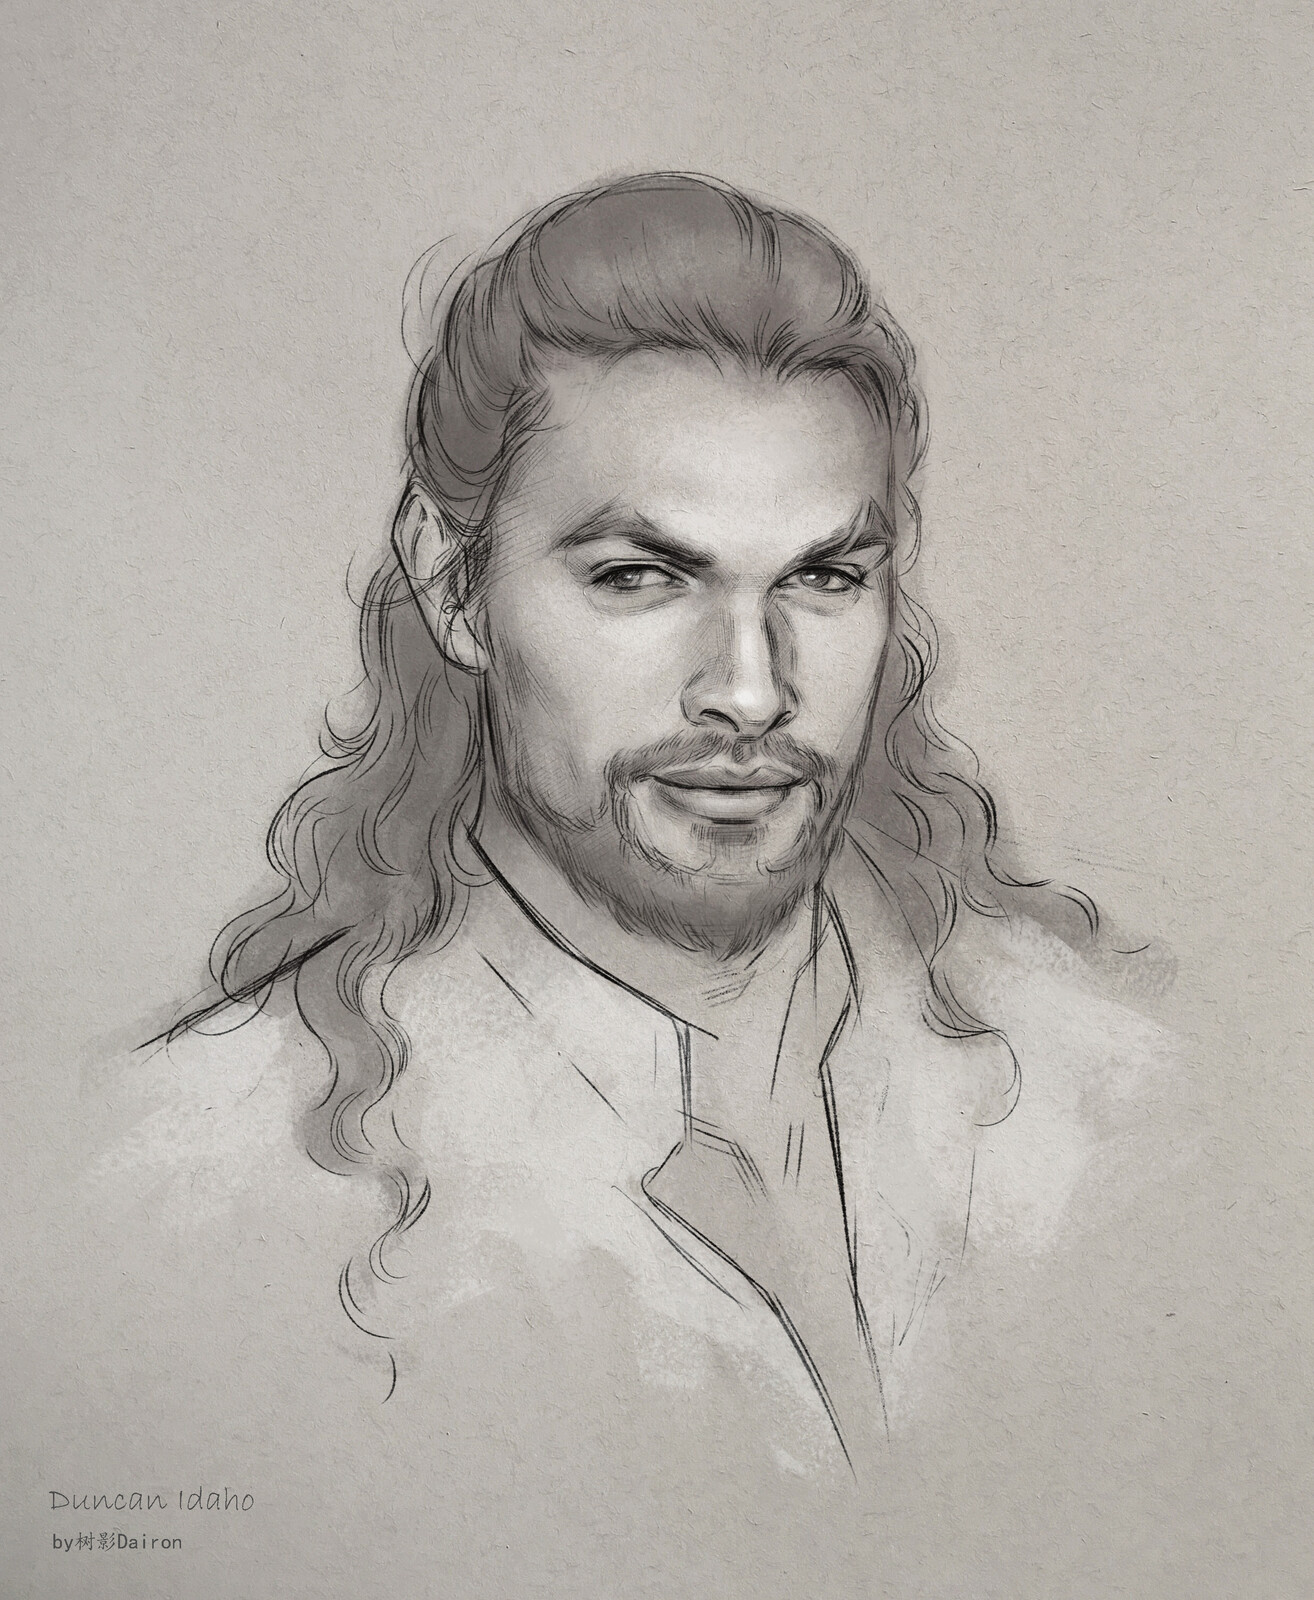 Portrait drawing sketch: Duncan Idaho from the movie Dune (played by Jason Momoa)